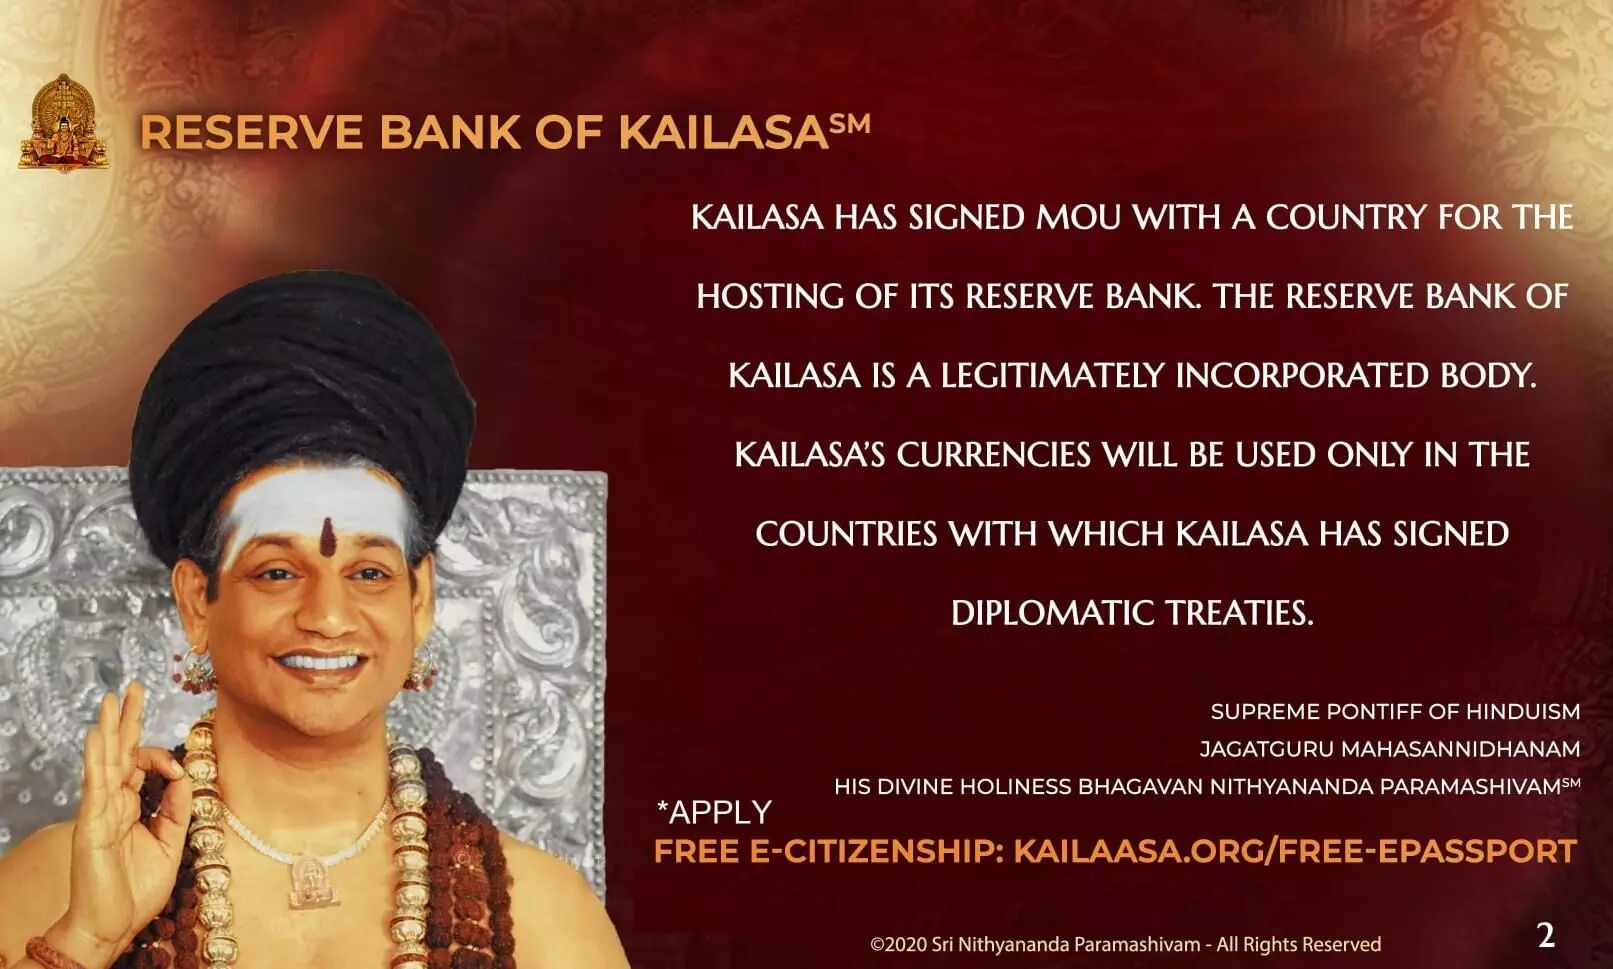 Absconding self-styled godman Nithyananda unveils the currency of the Reserve Bank of Kailaasa